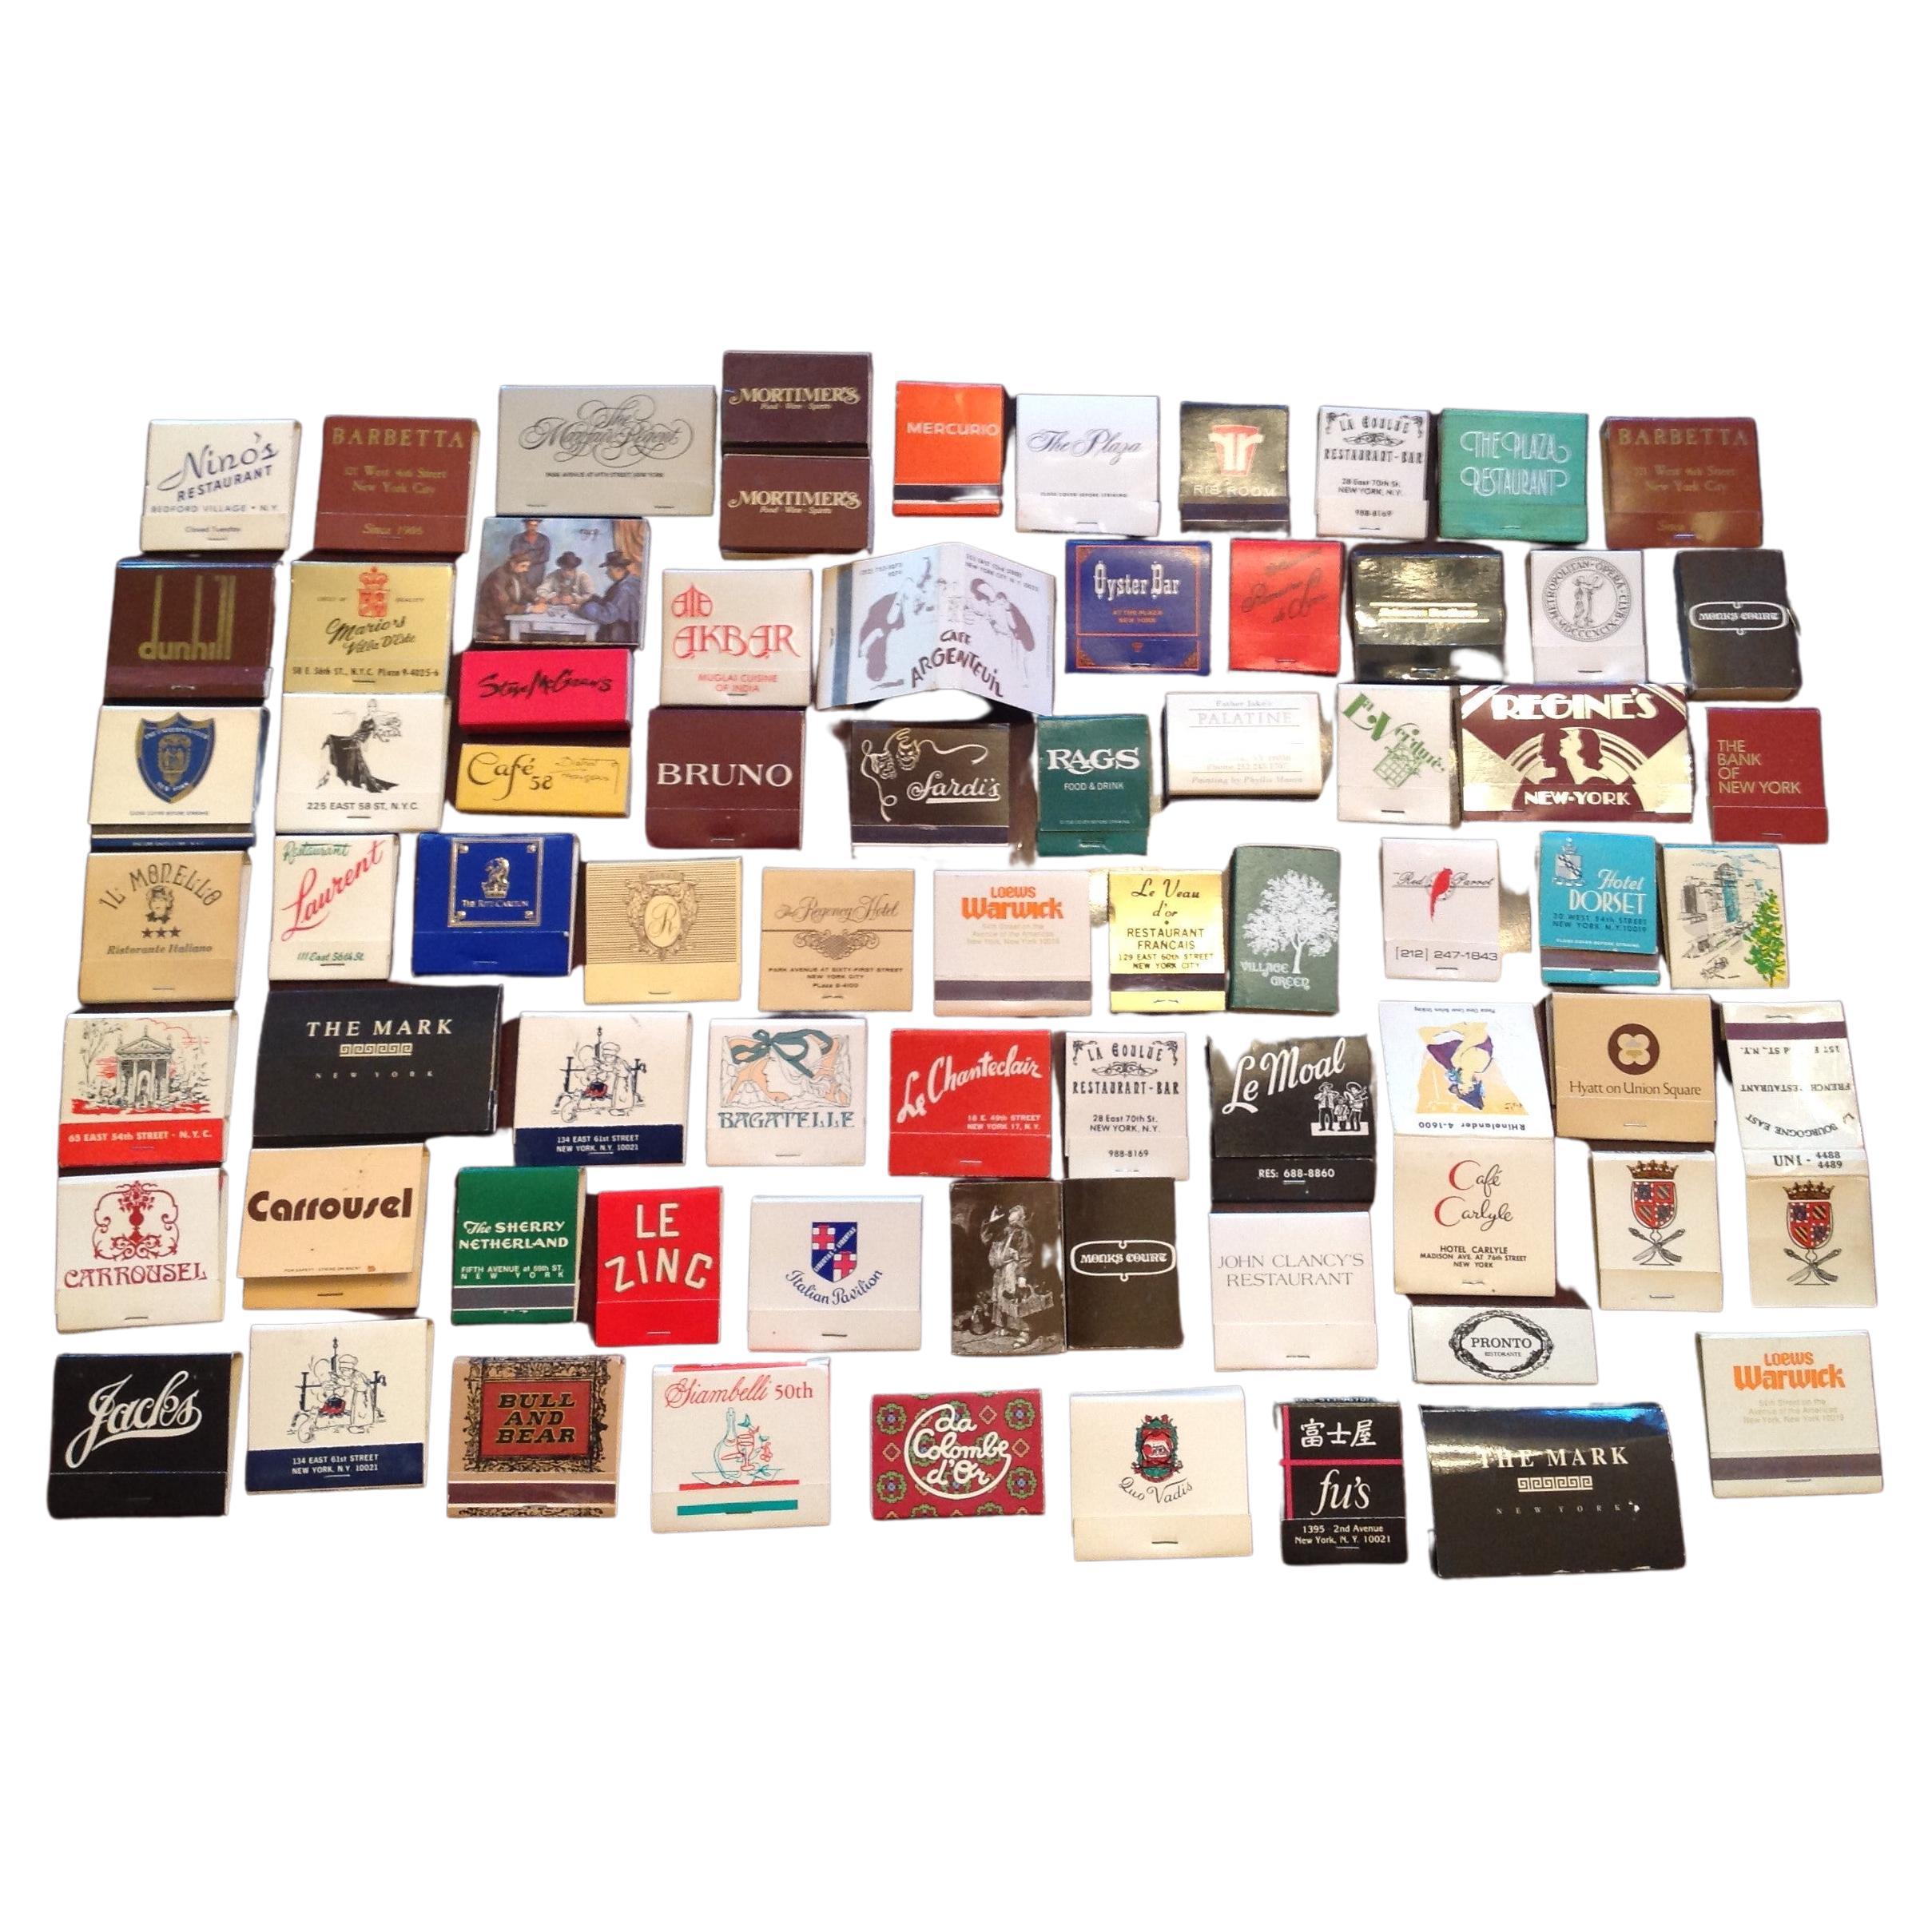 Vintage NY Hotel and Restaurant Matchbooks from the 1950s-1980s